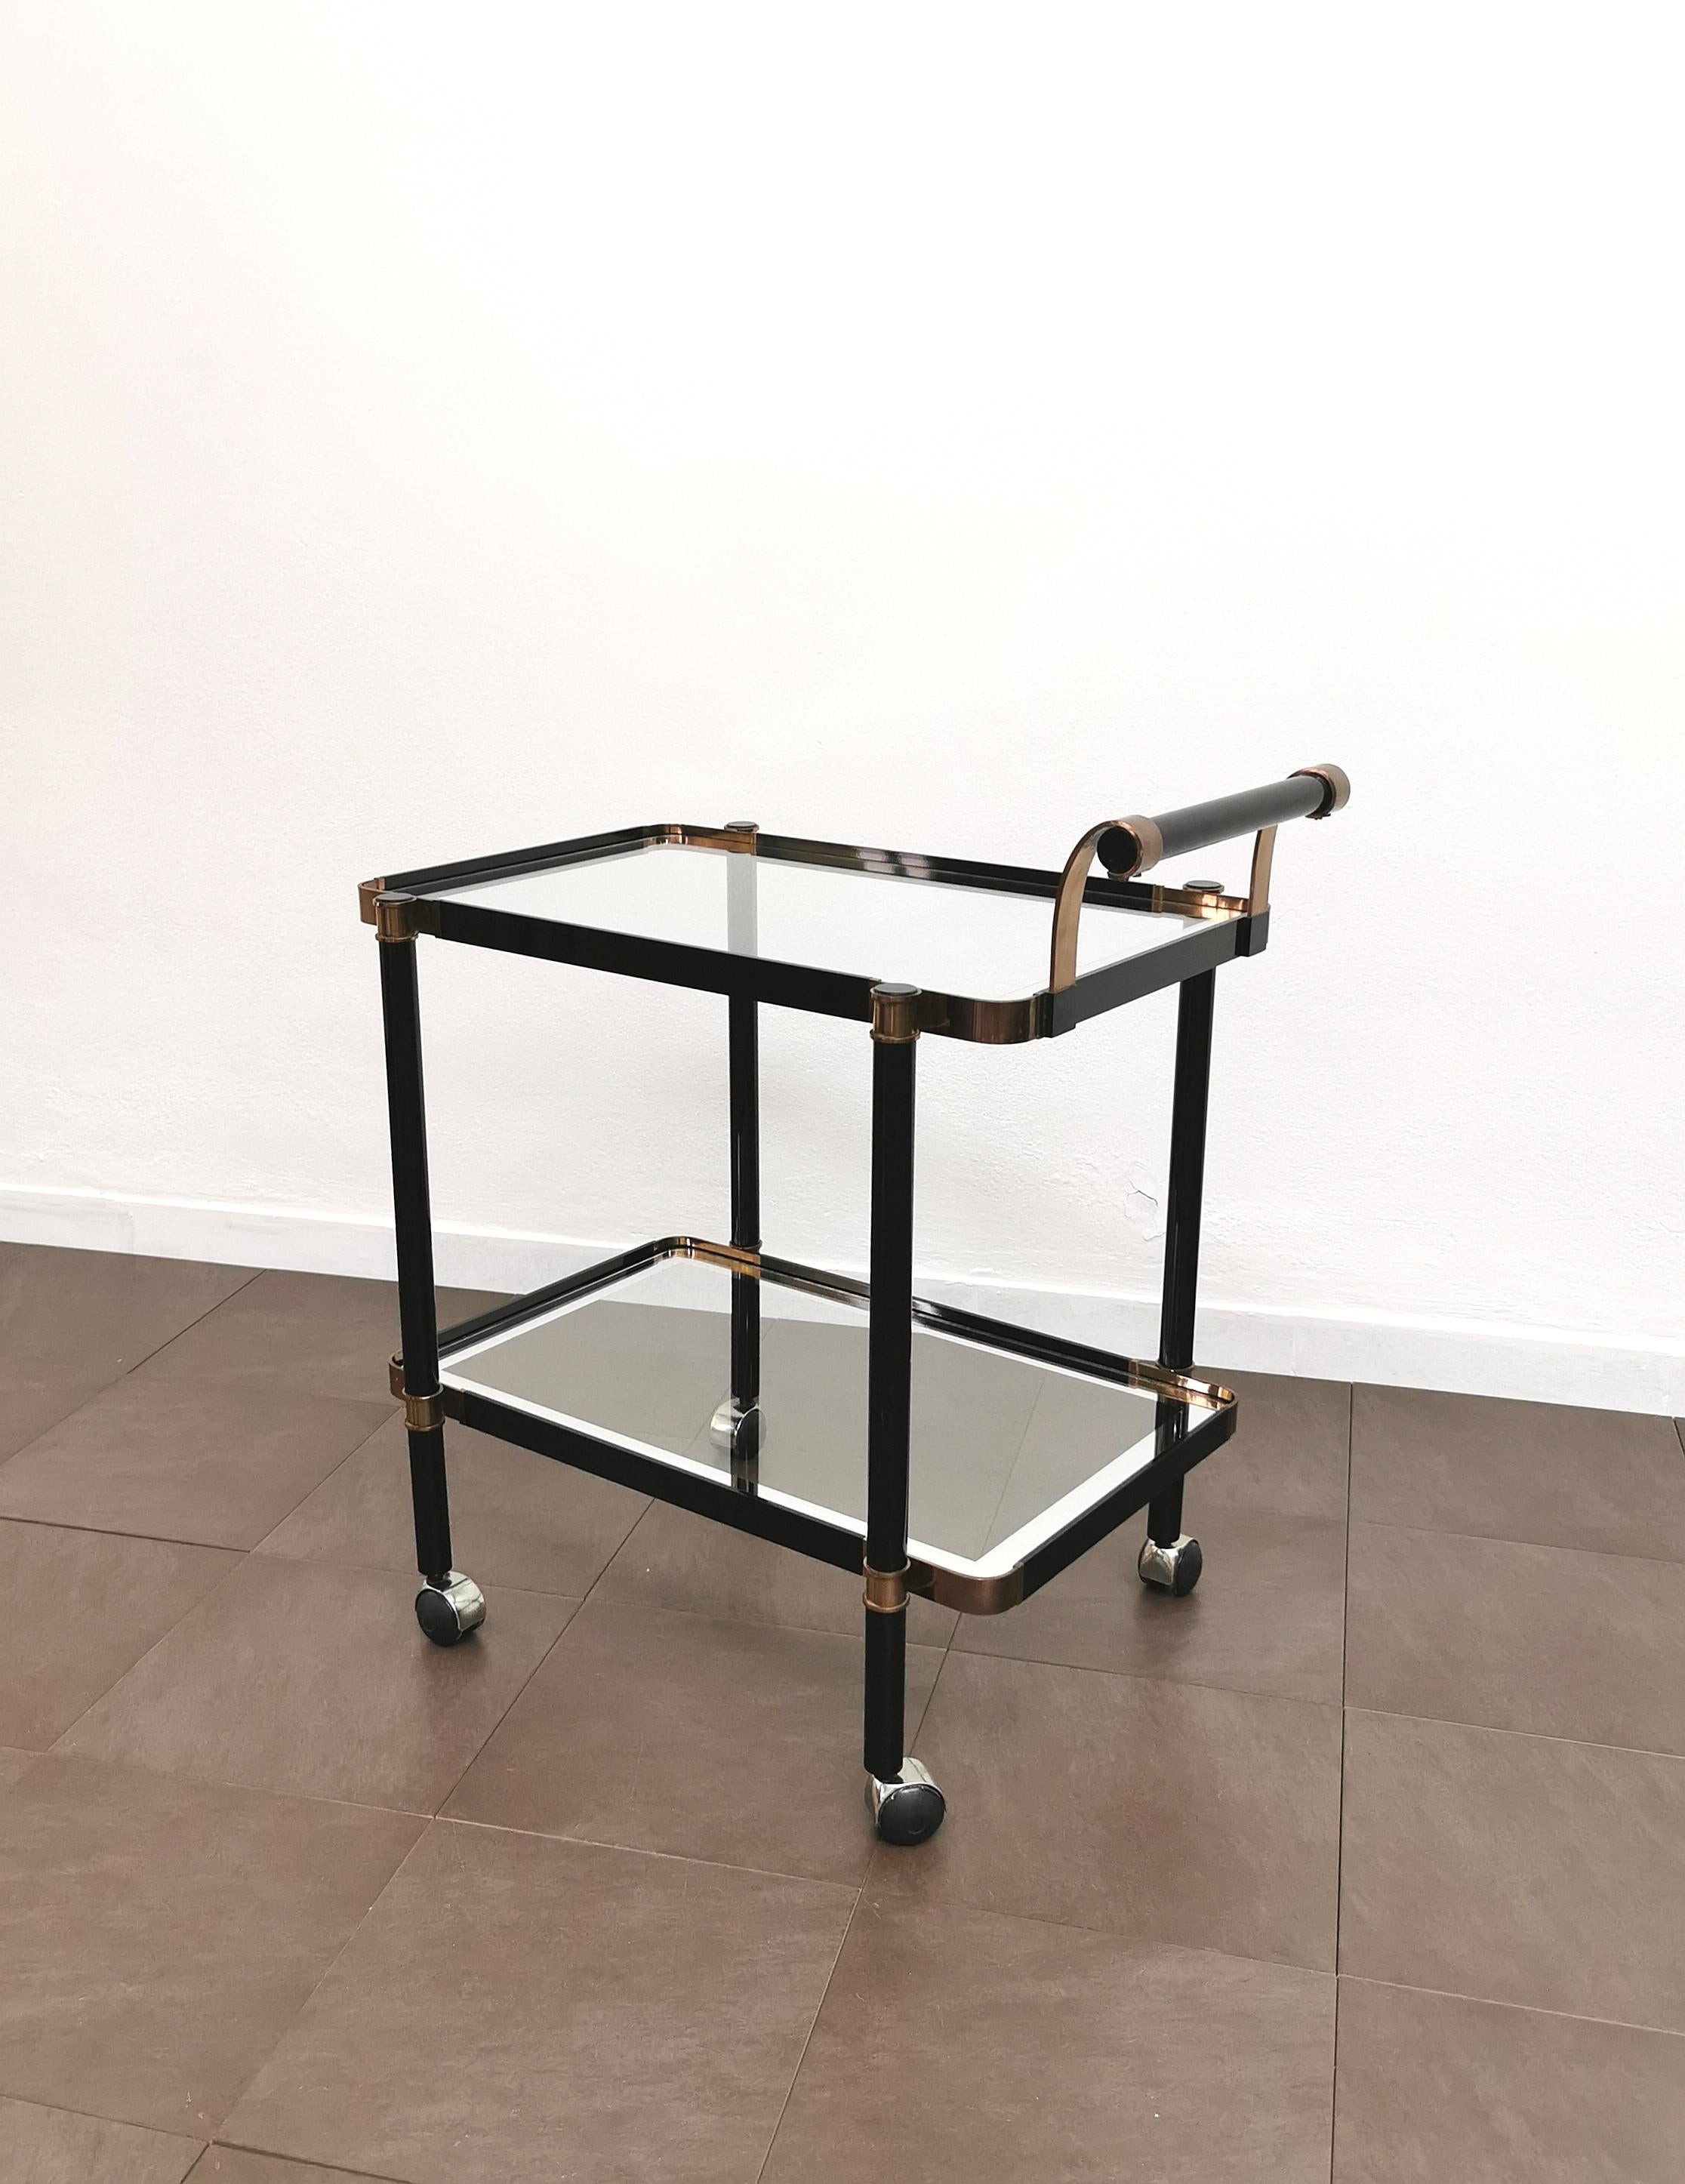 Midcentury Bar Cart Brass Glass Black Enameled Aluminum Italian Design, 1970s In Good Condition For Sale In Palermo, IT